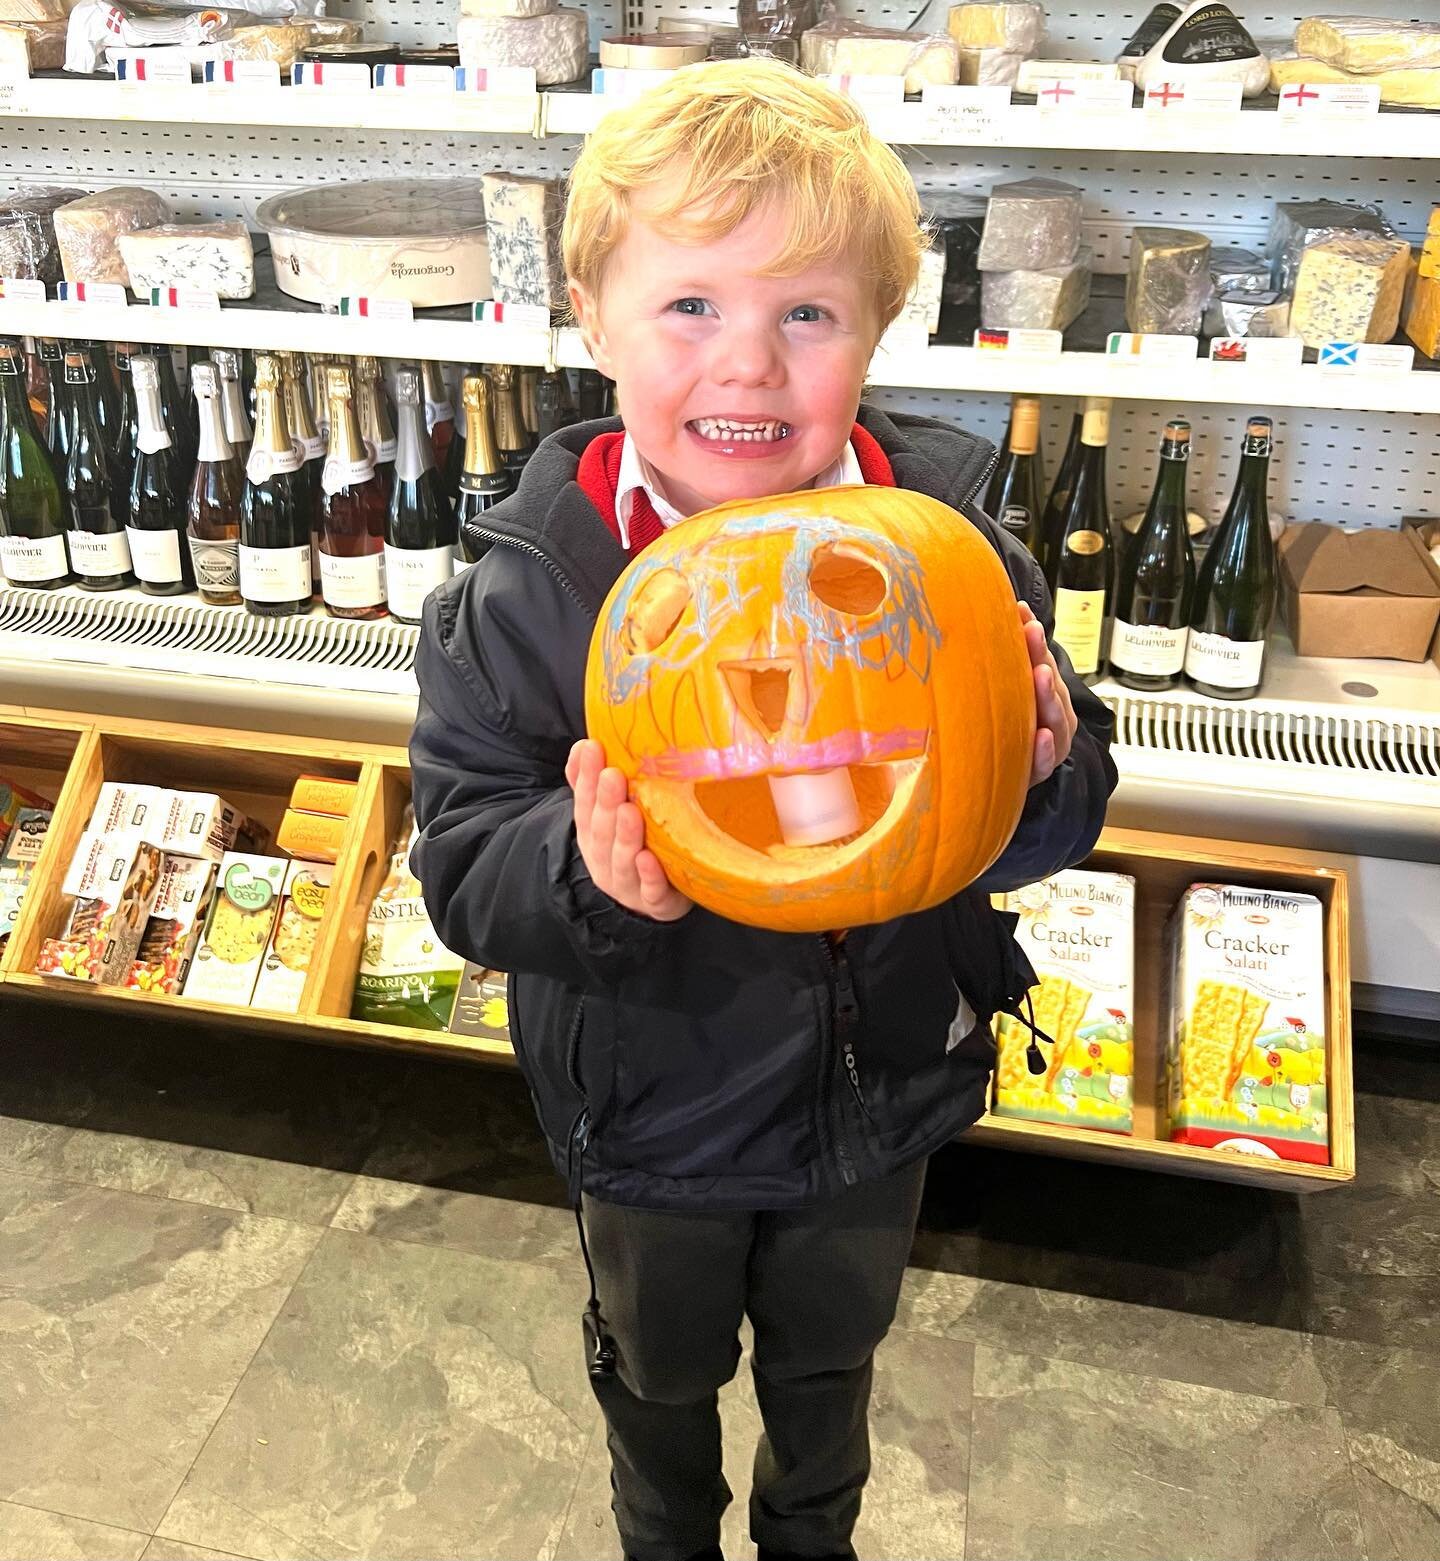 Introducing 4 year old Chester, the proud winner of our pumpkin carving competition. We especially like all the effort that went into the spooky colouring around the face. We&rsquo;ll done Chester and thank you to everyone who entered!

#pumpkin #pum